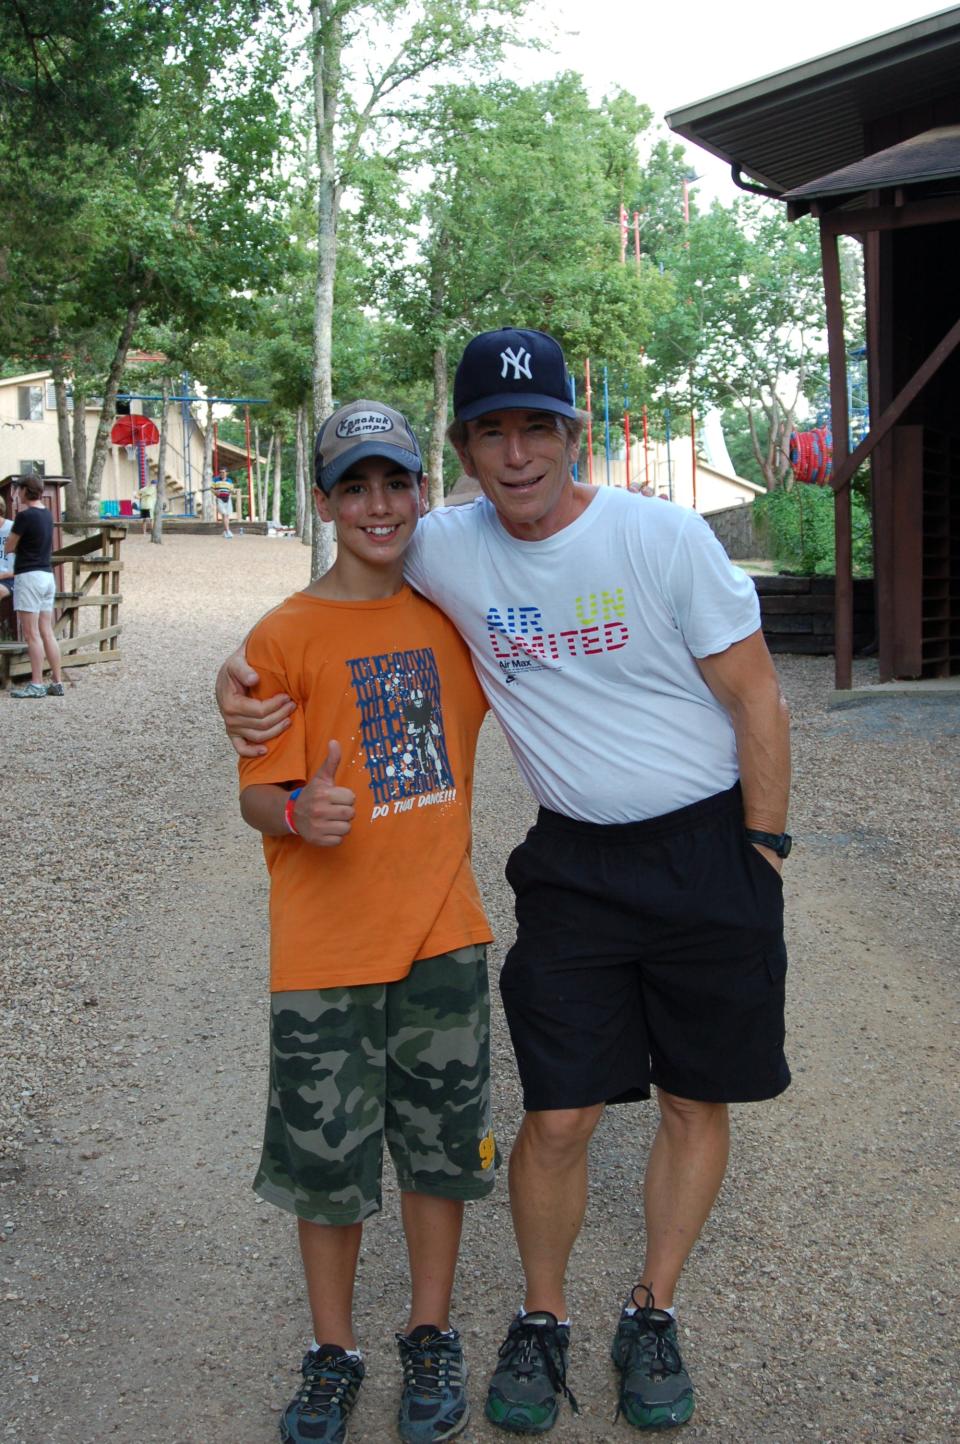 Ashton Alarcon, one of the Kanakuk campers abused by Pete Newman, poses with Kanakuk CEO Joe White.